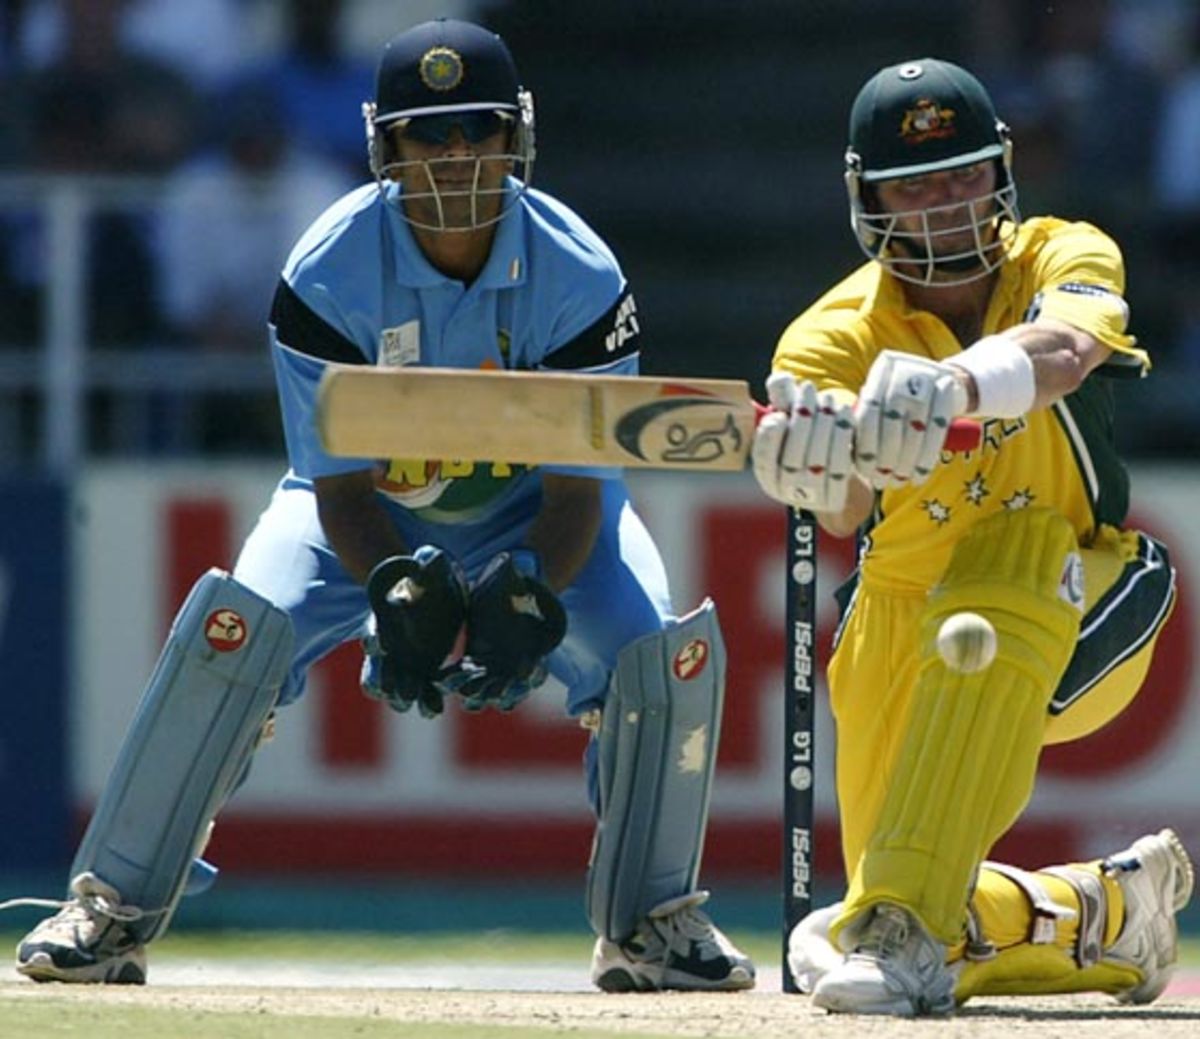 World Cup 2003, Final - Australia v India at Johannesburg, 23rd March 2003